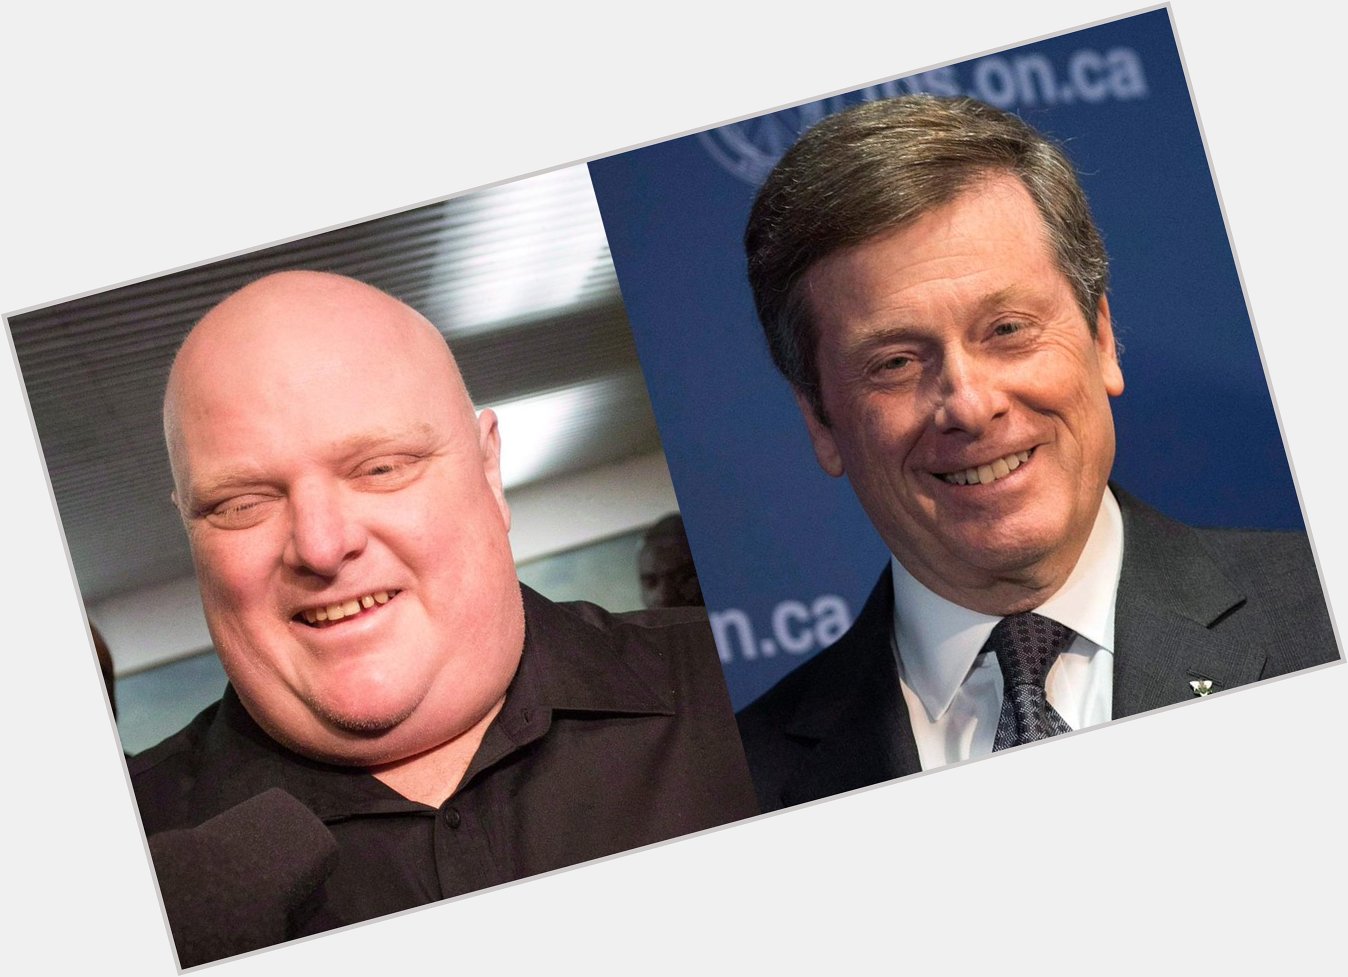 Happy birthday to most recent mayors! John Tory turns 61 today, and Rob Ford is 46 